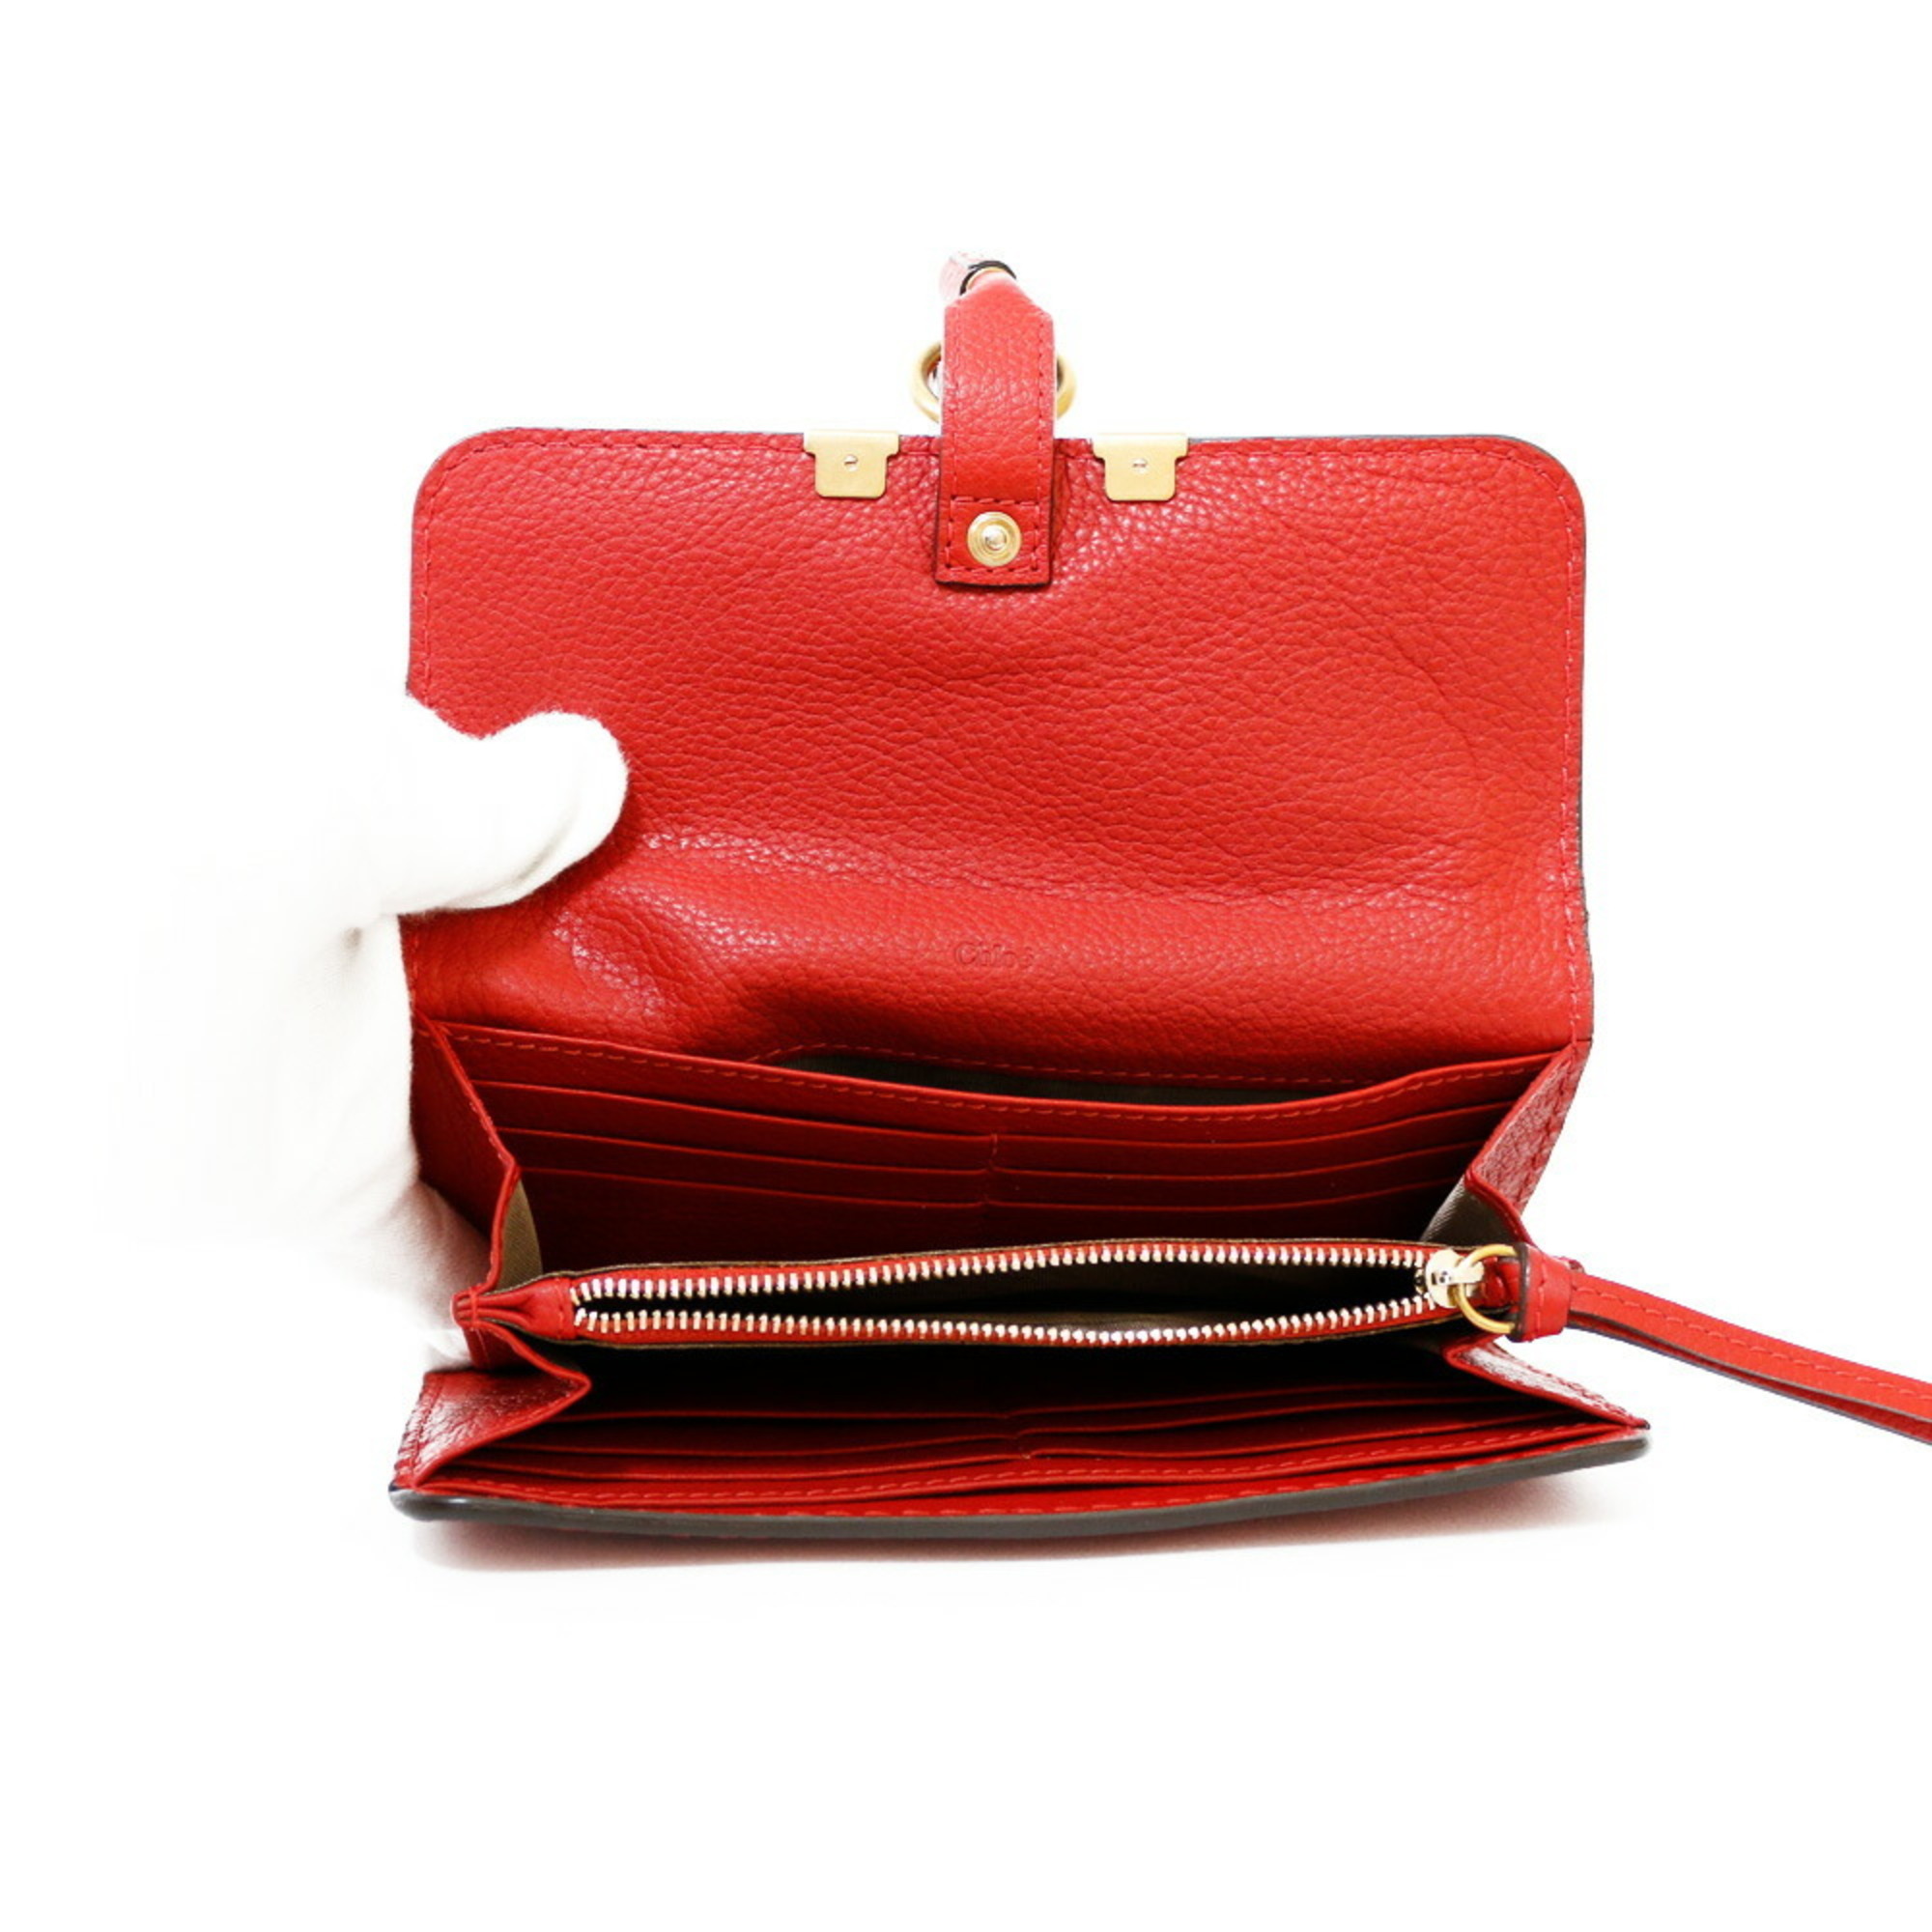 Chloé Chloe Purse Red Ladies Leather